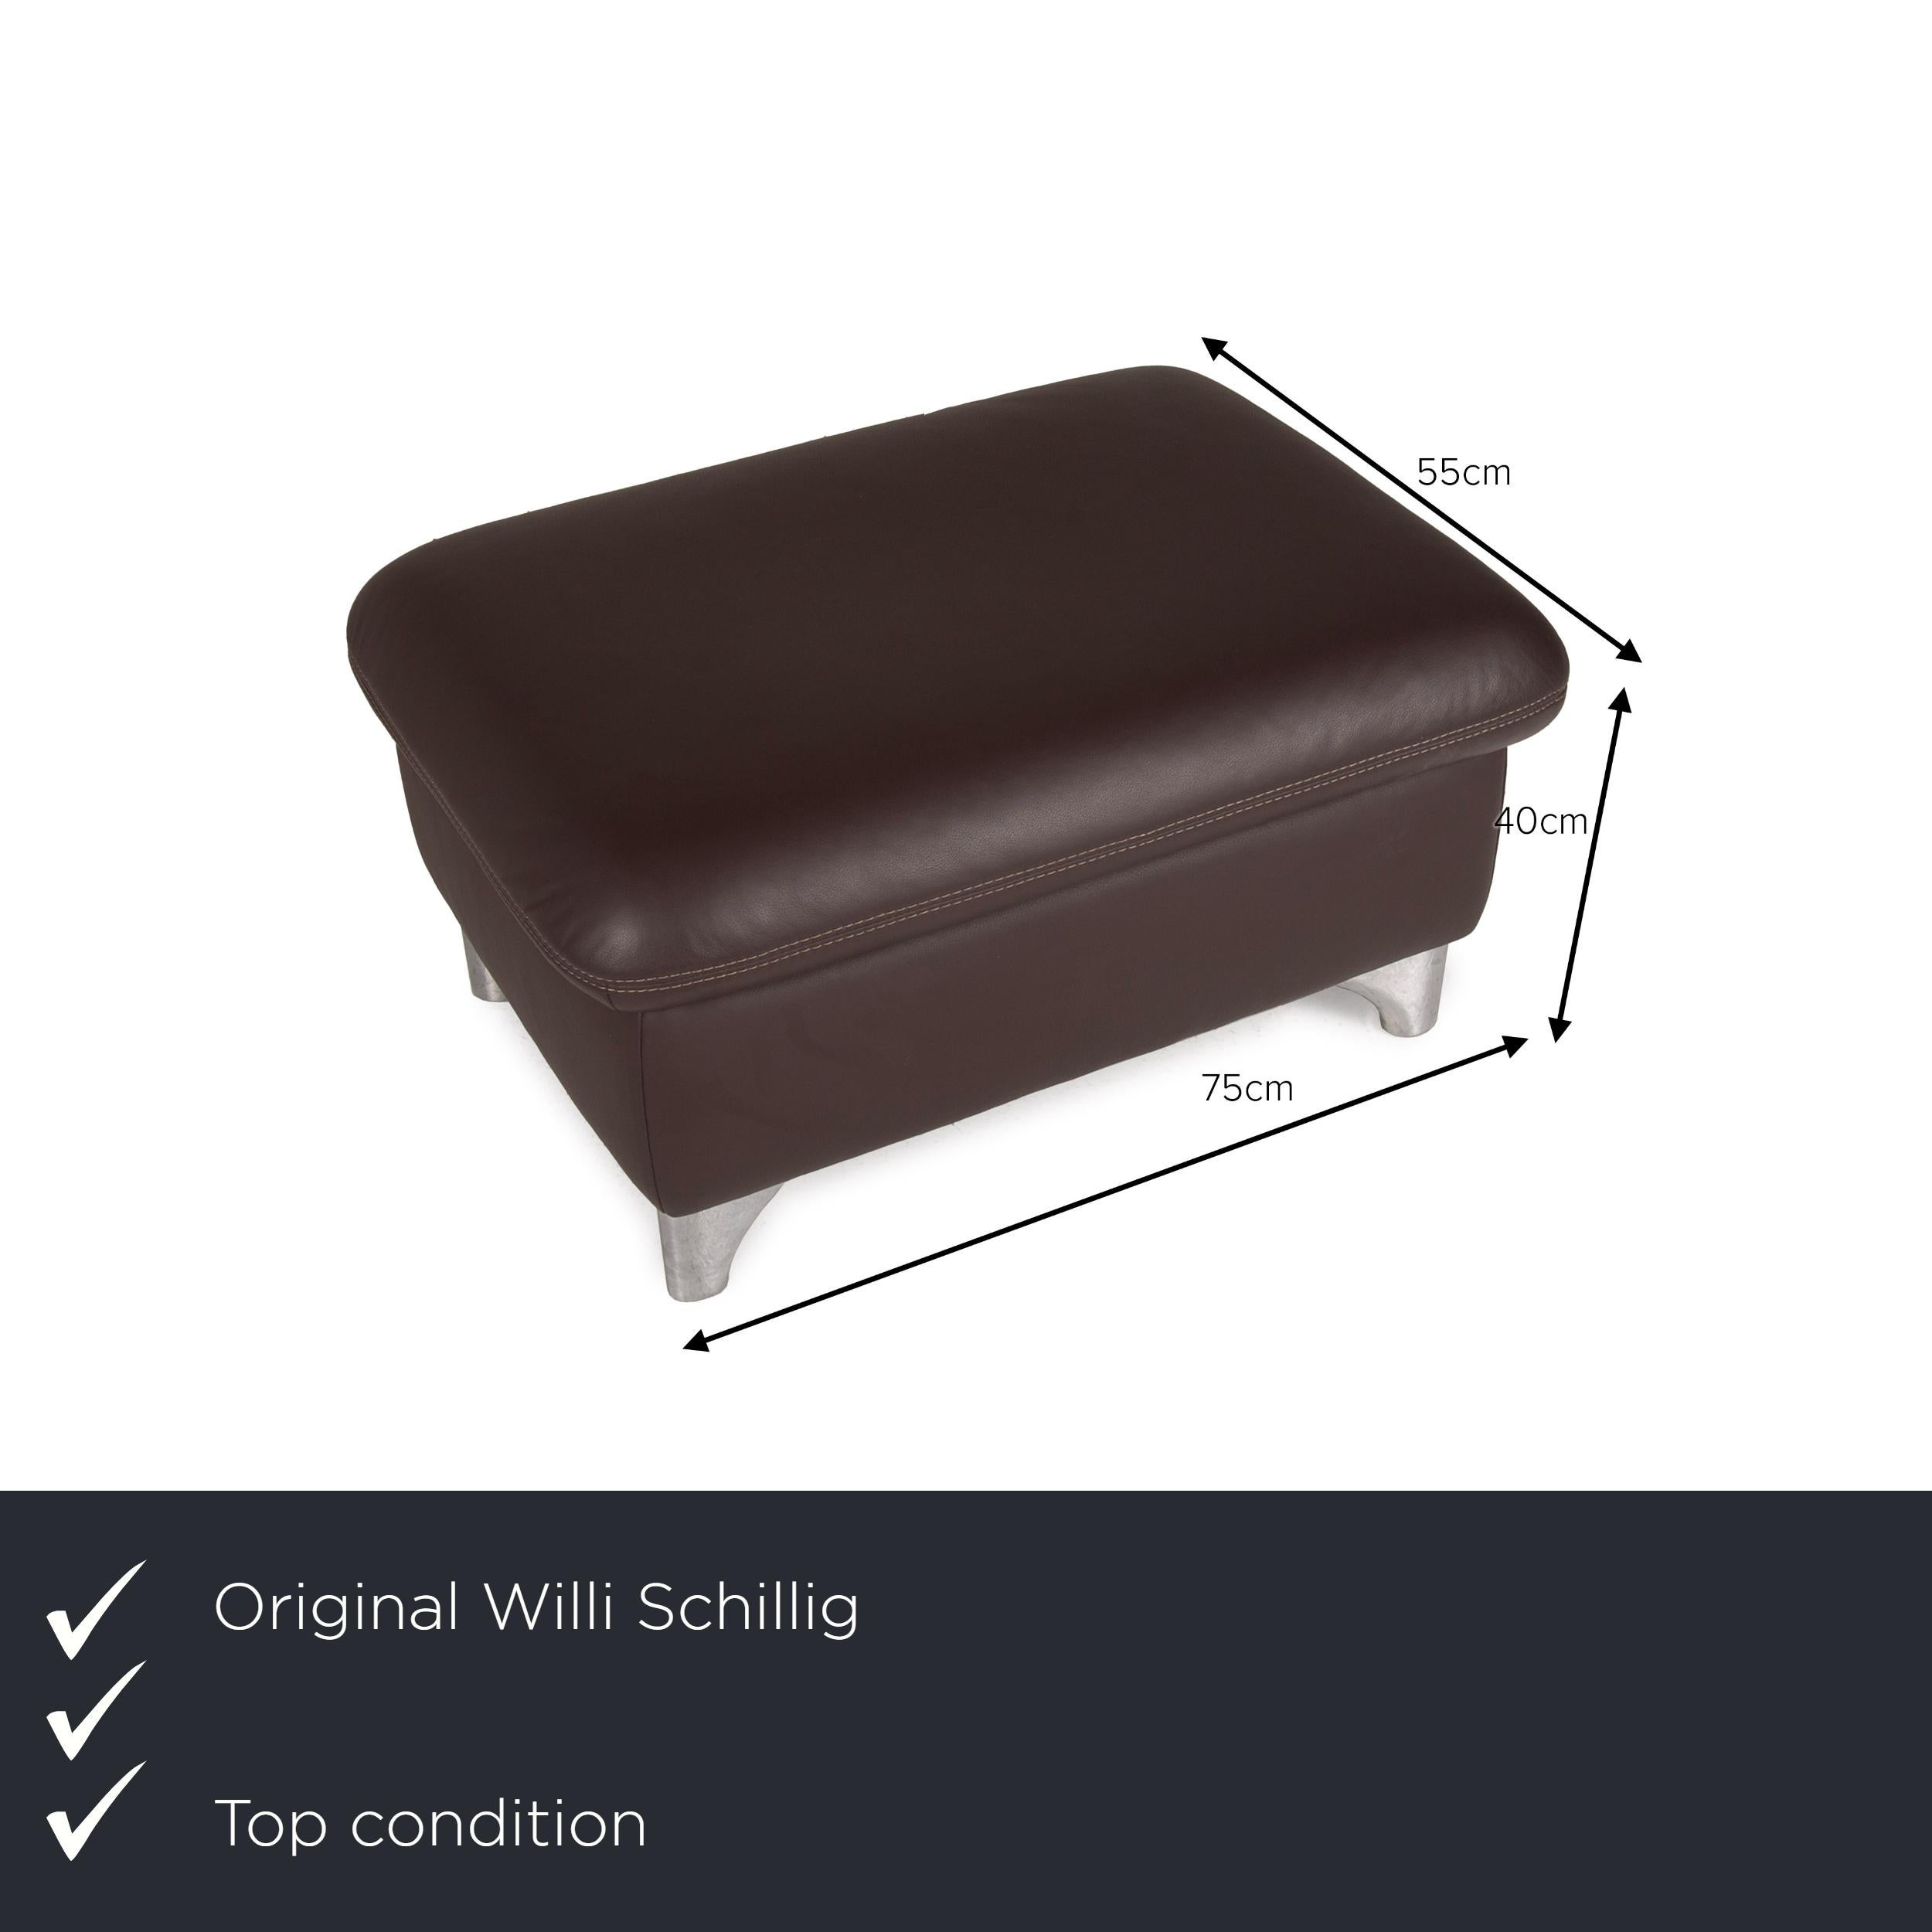 We present to you a Willi Schillig leather stool dark brown.
 

 Product measurements in centimeters:
 

Depth: 55
 Width: 75
 Height: 40
 Seat height: 40.





 